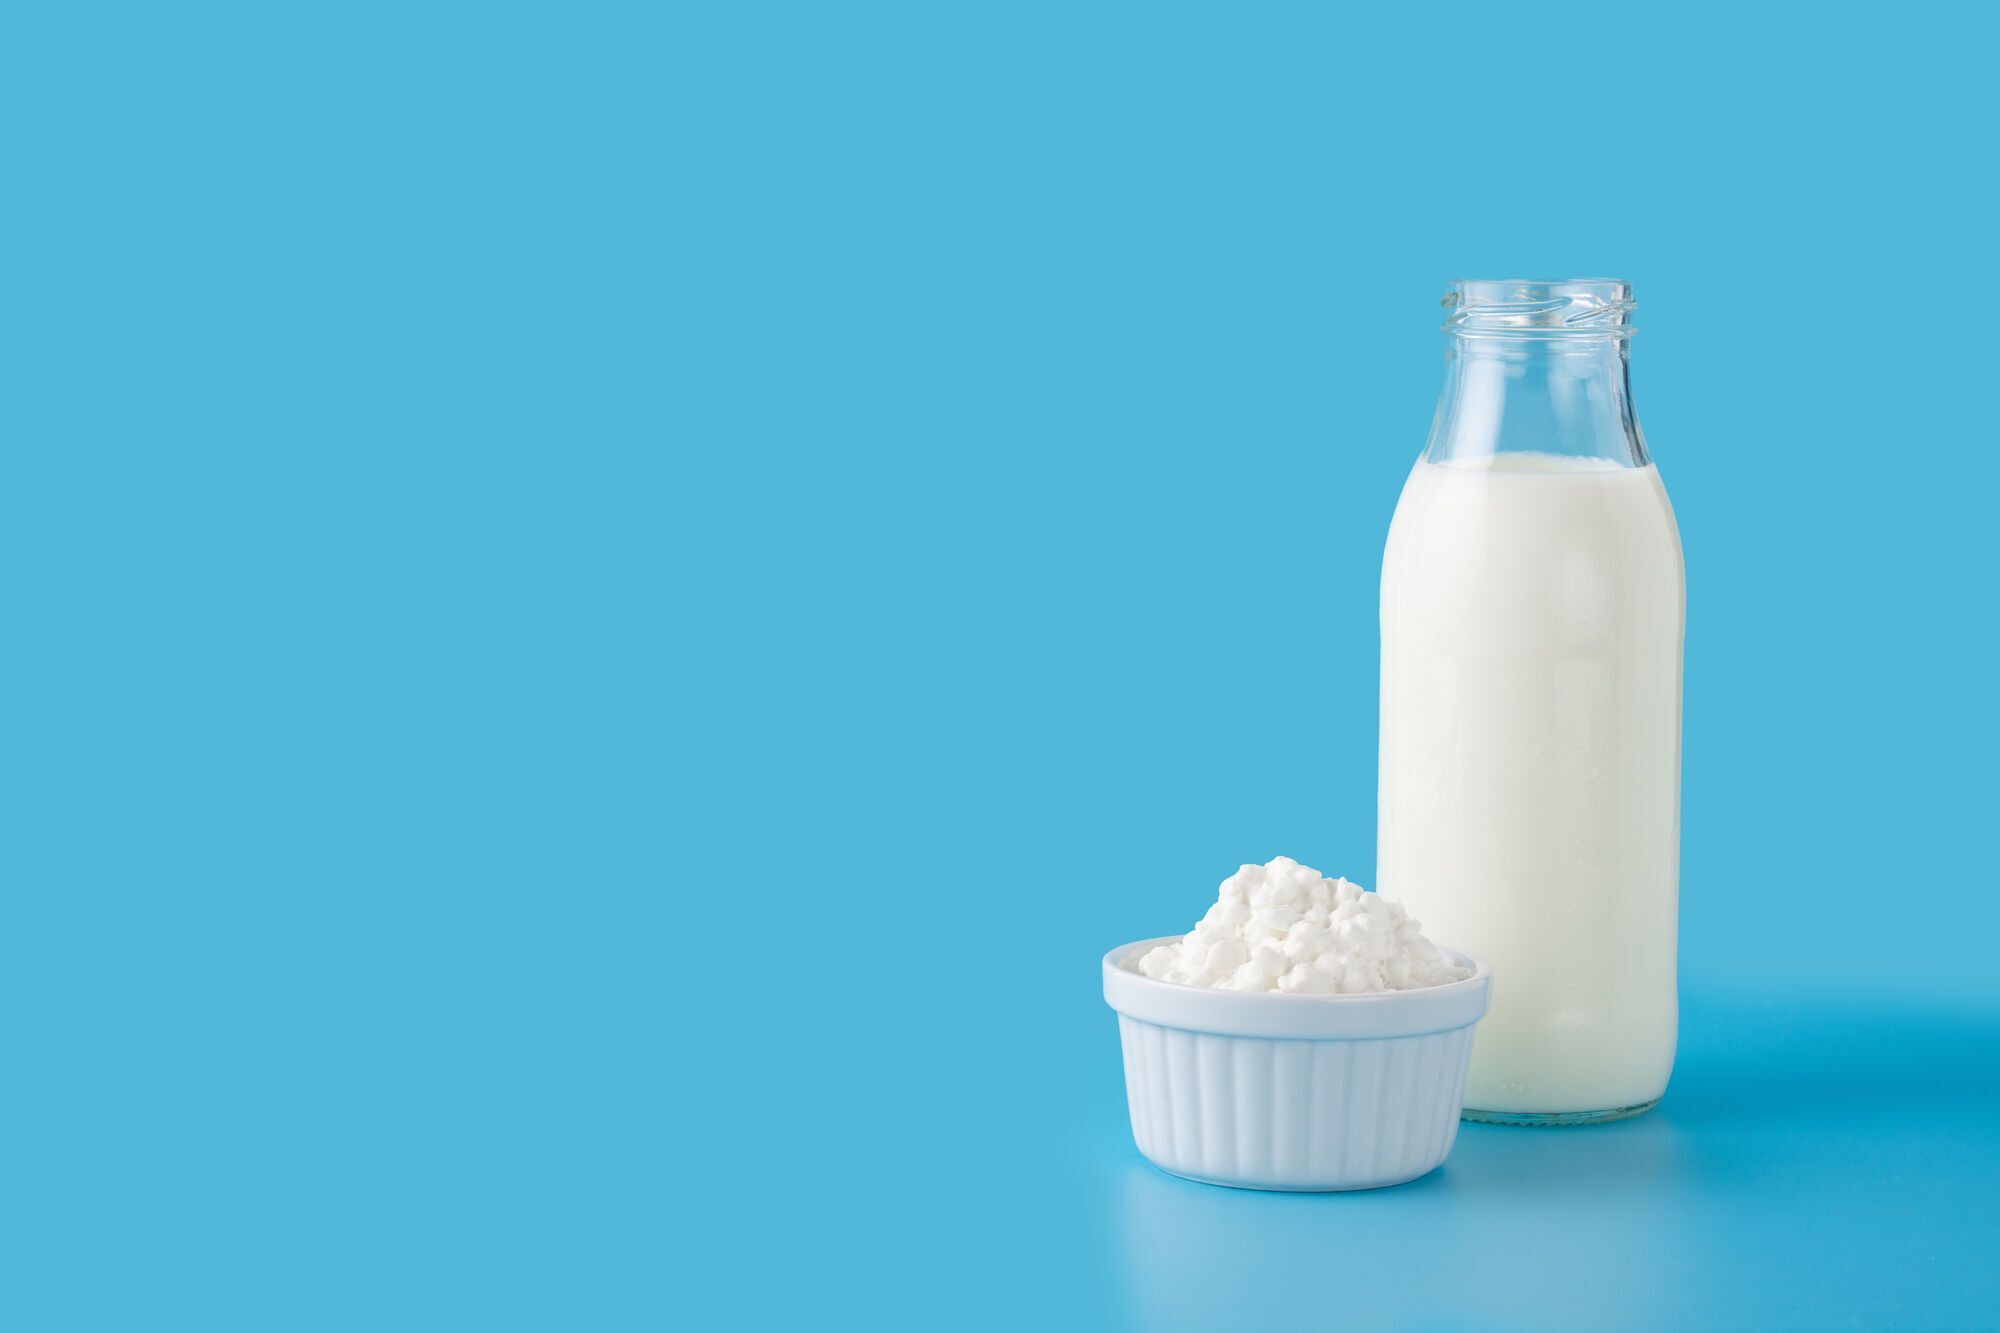 How to choose quality kefir: pay attention to the composition. Tips from experts